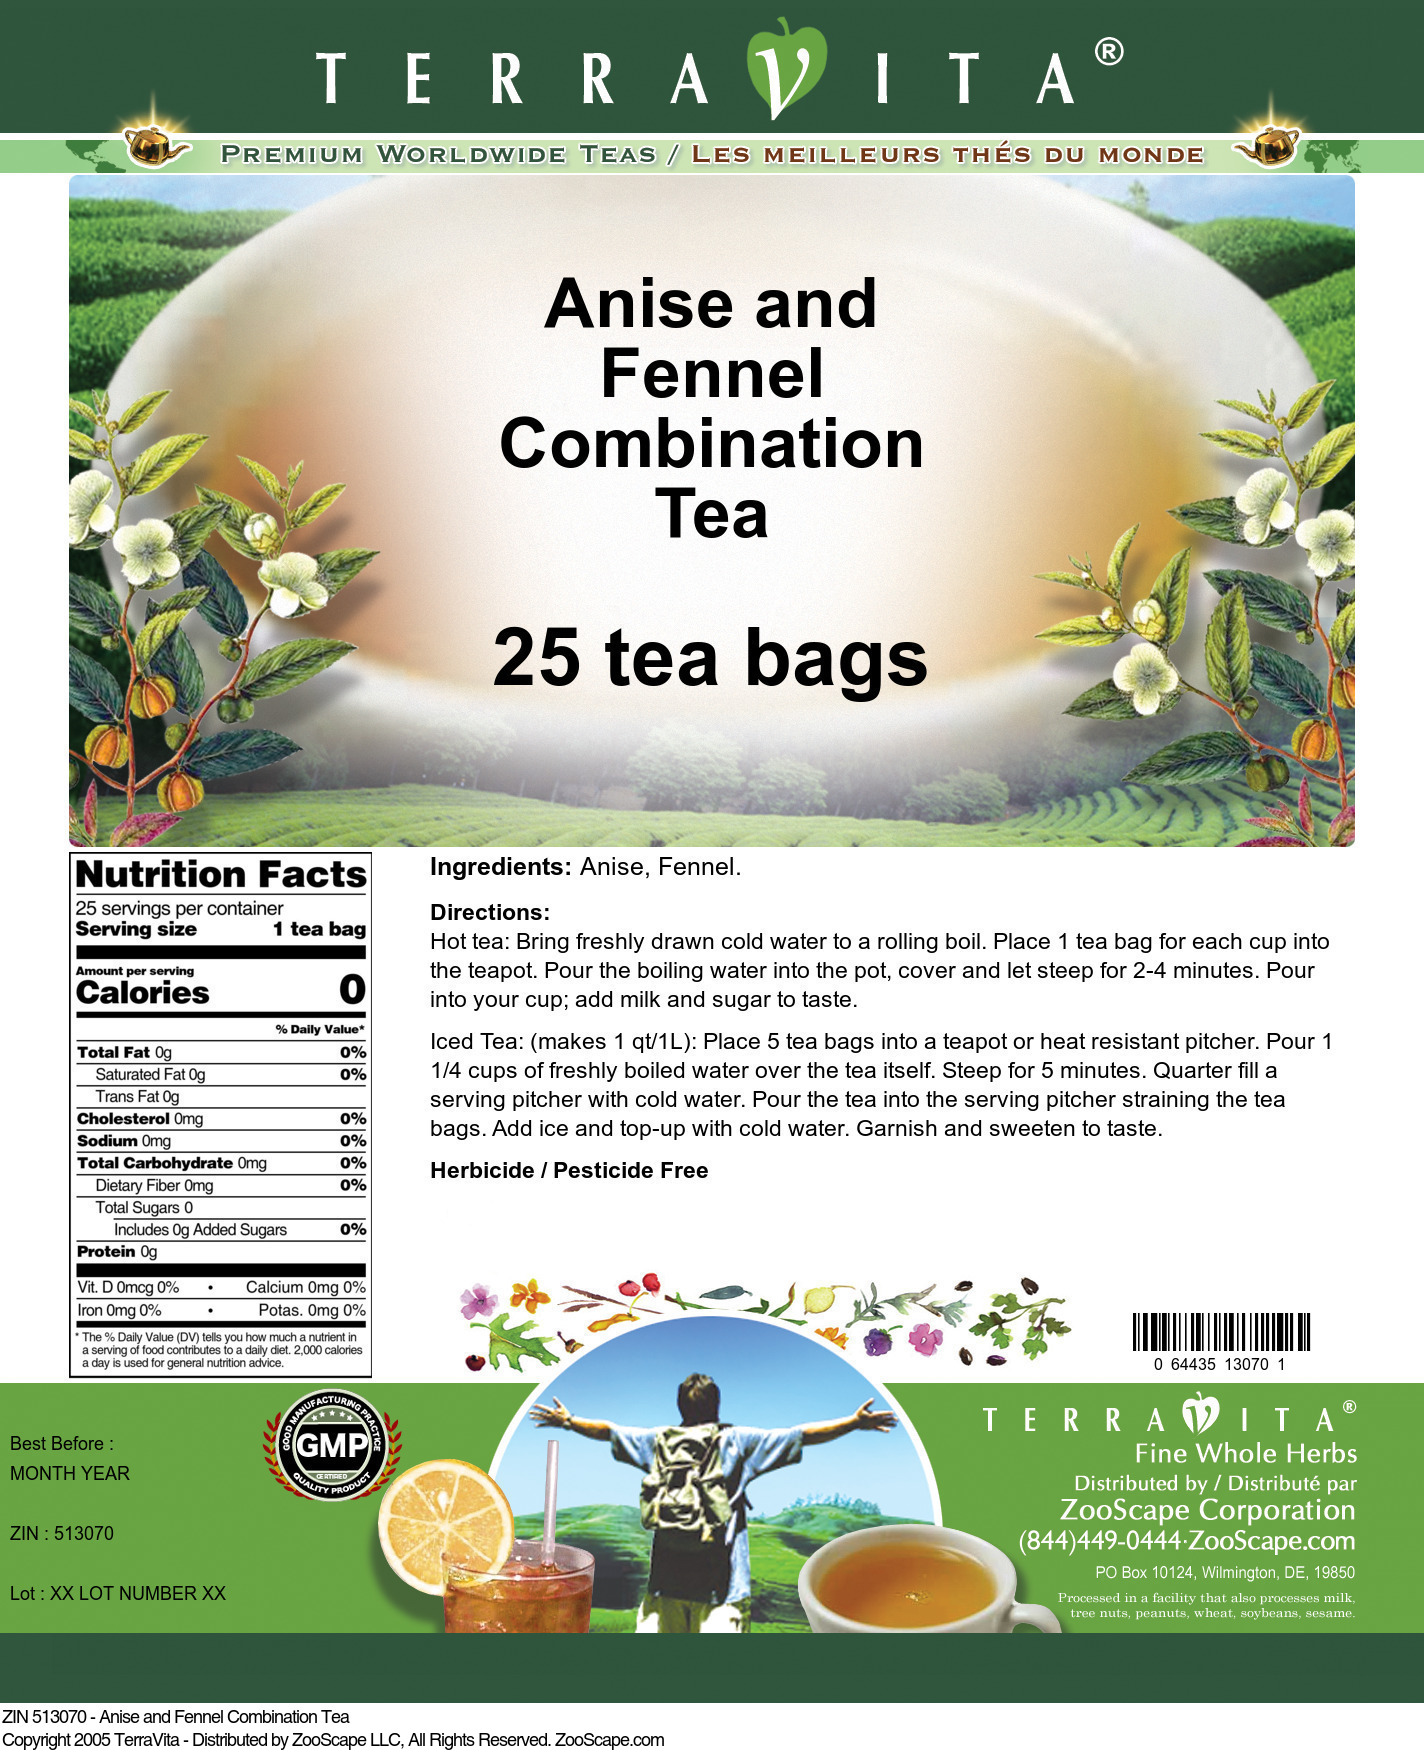 Anise and Fennel Combination Tea - Label